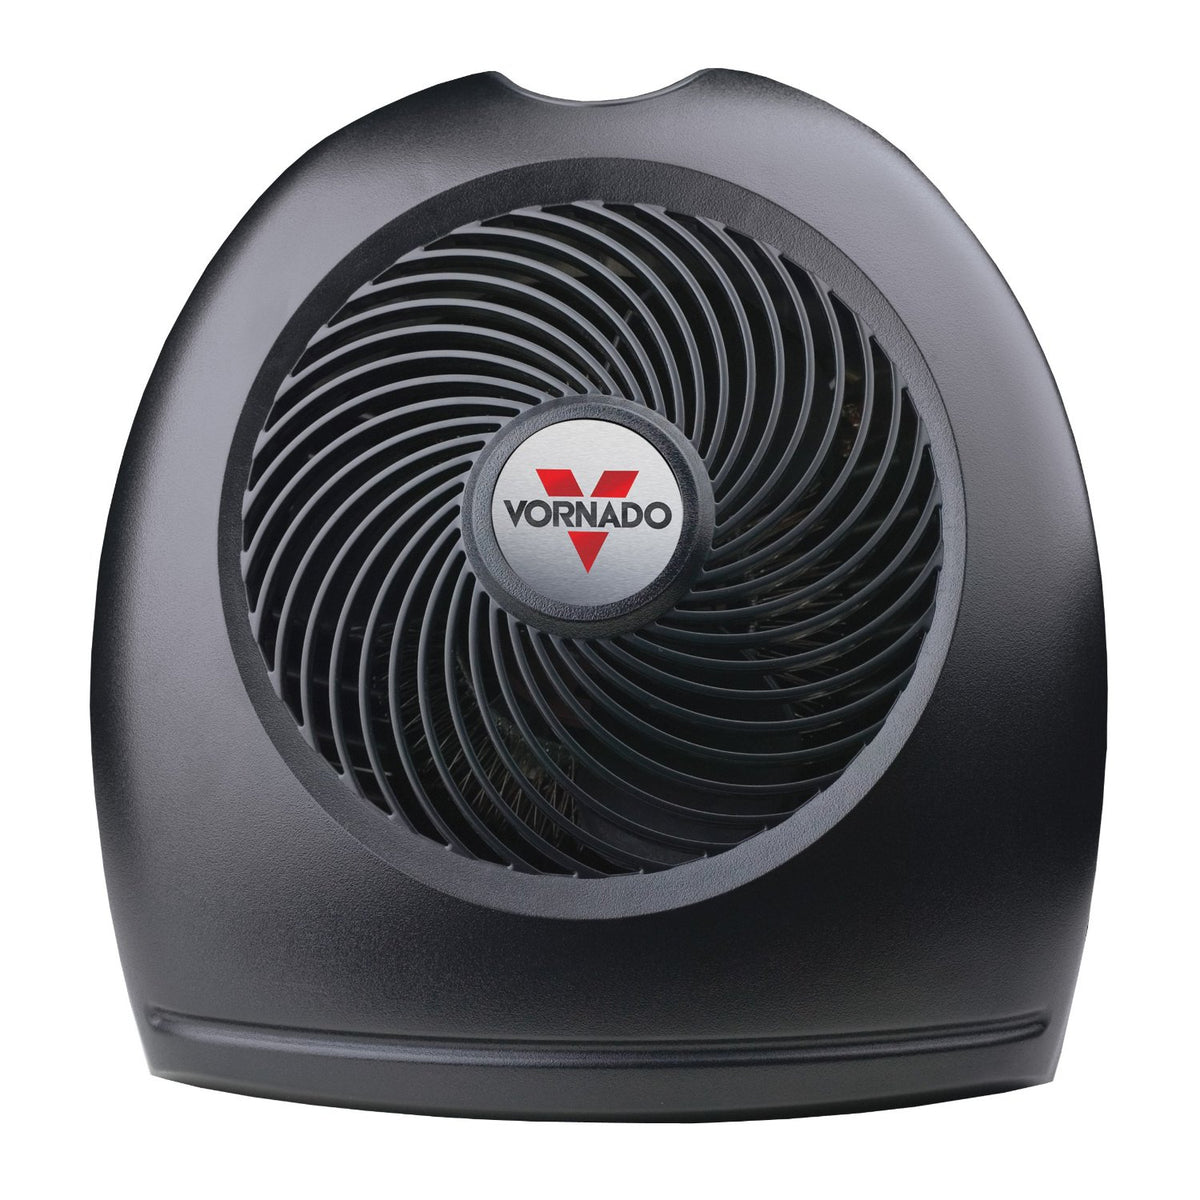 Buy vornado dvth whole room heater - Online store for heaters, fan-forced in USA, on sale, low price, discount deals, coupon code